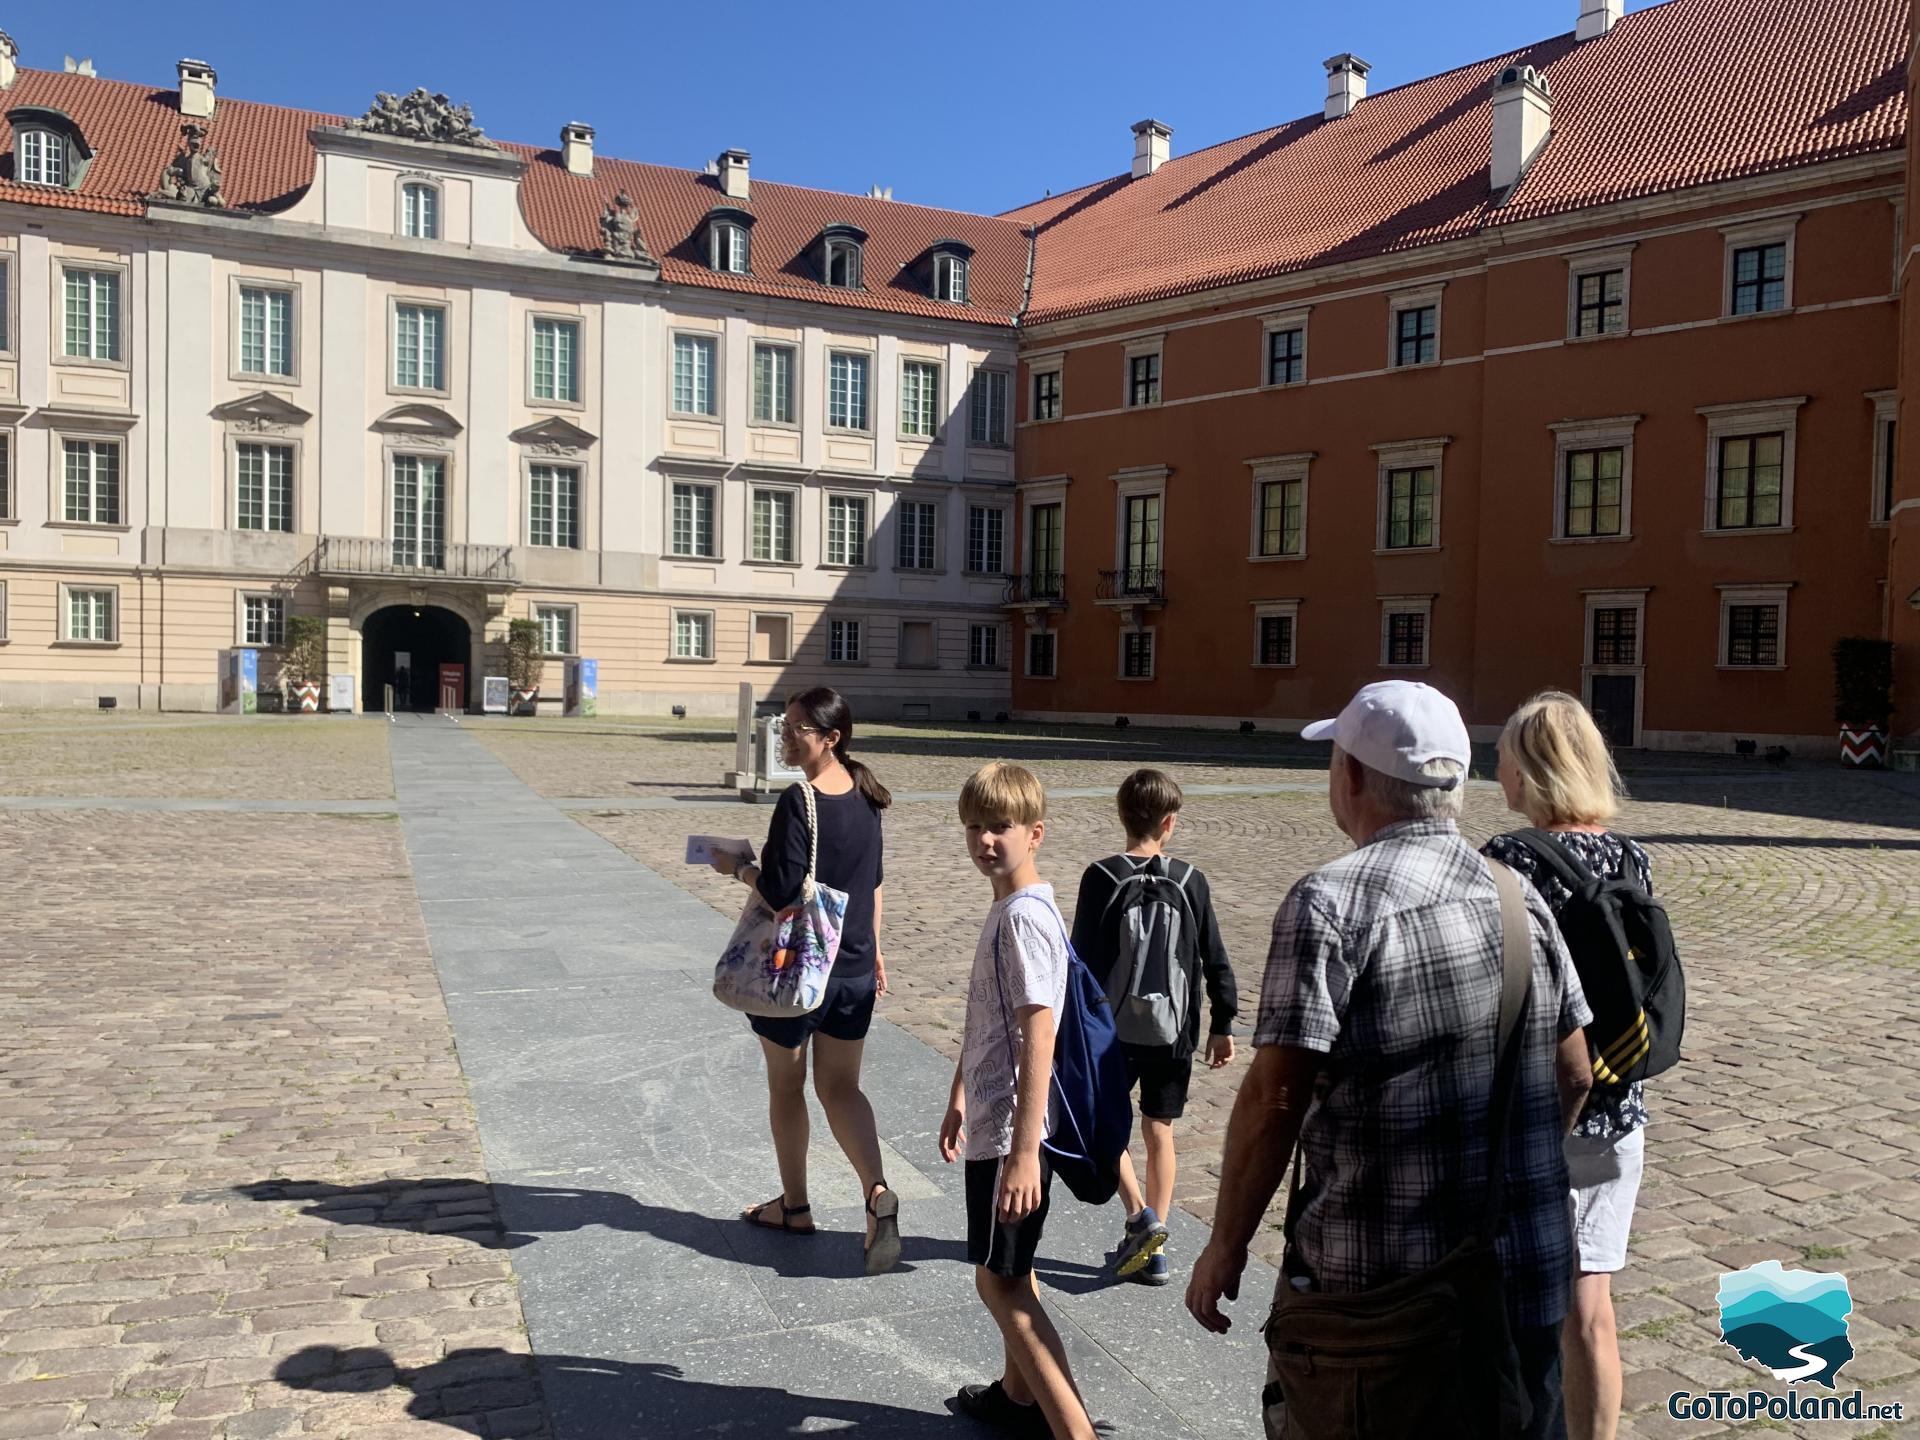 the family is walking along the courtyard of the castle